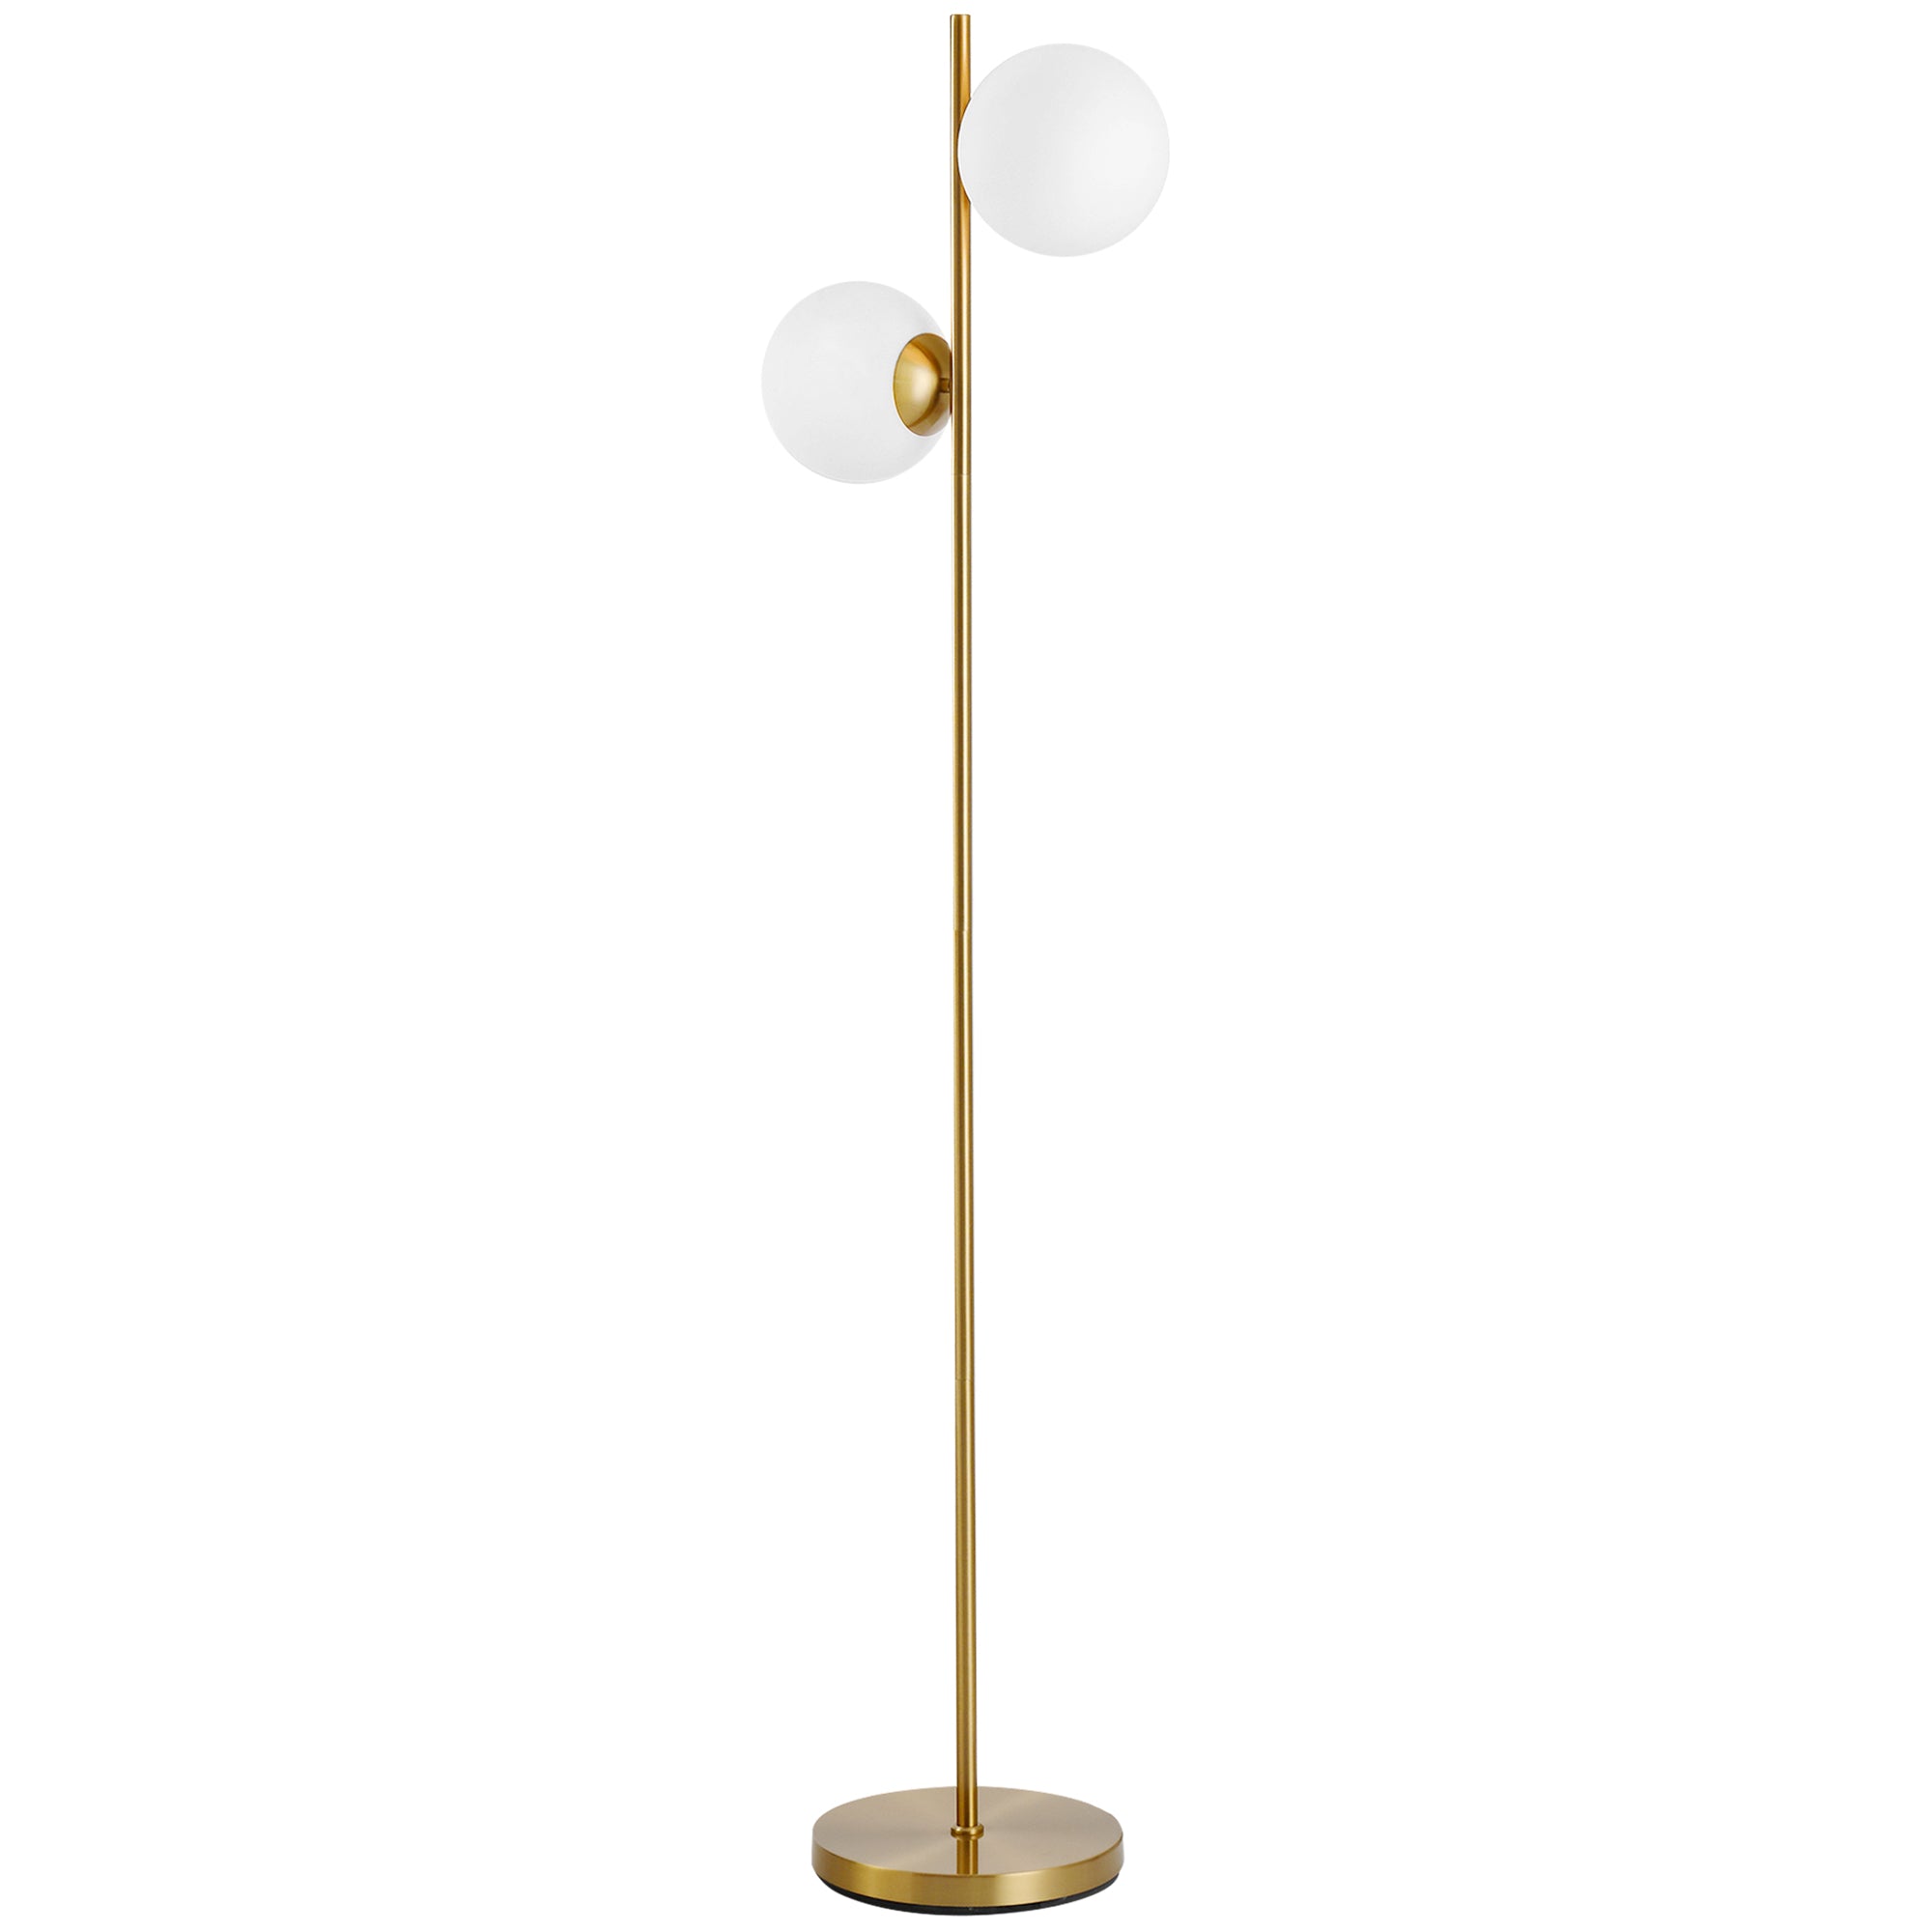 2 Glass Shade Floor Lamp Metal Pole Cool Modern Decorative w/ Floor Switch Home Office Furnishing Gold  AOSOM   